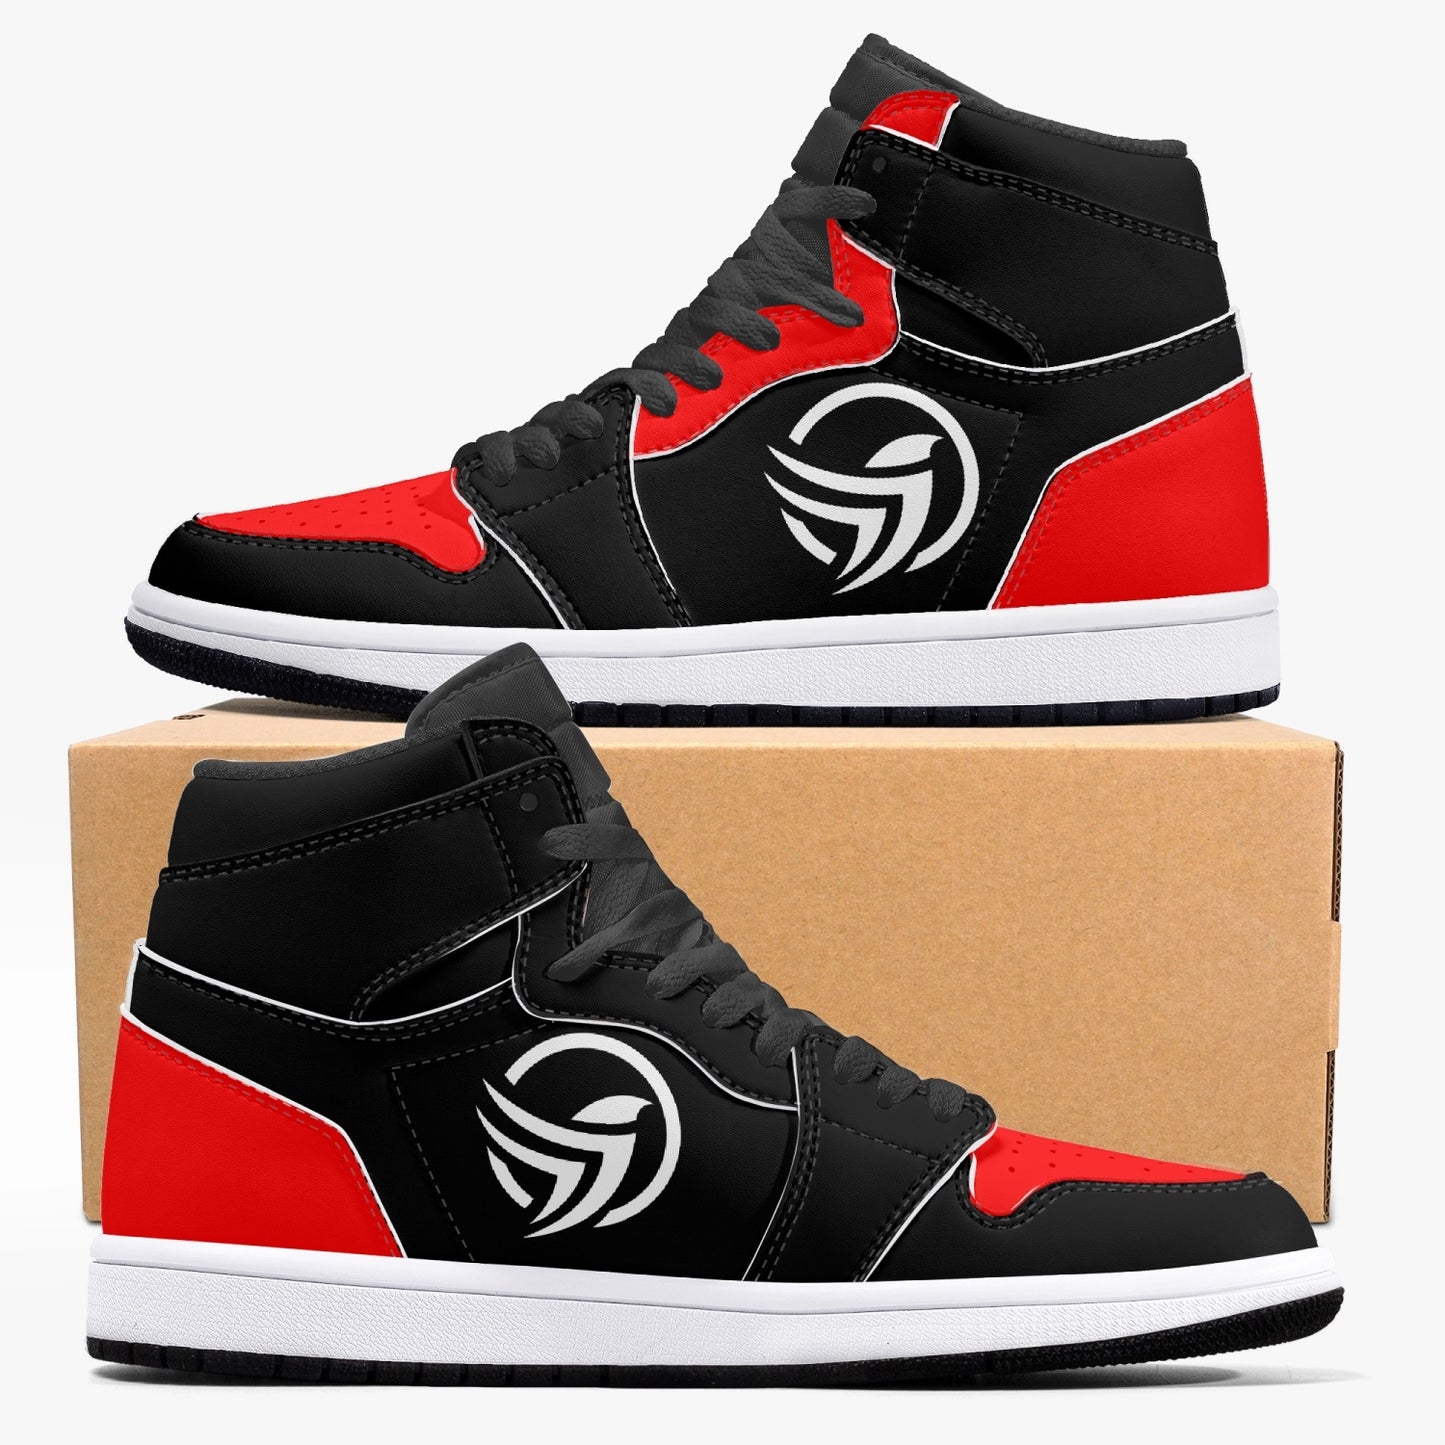 Unstax Red/Black High-Top Leather Sneakers